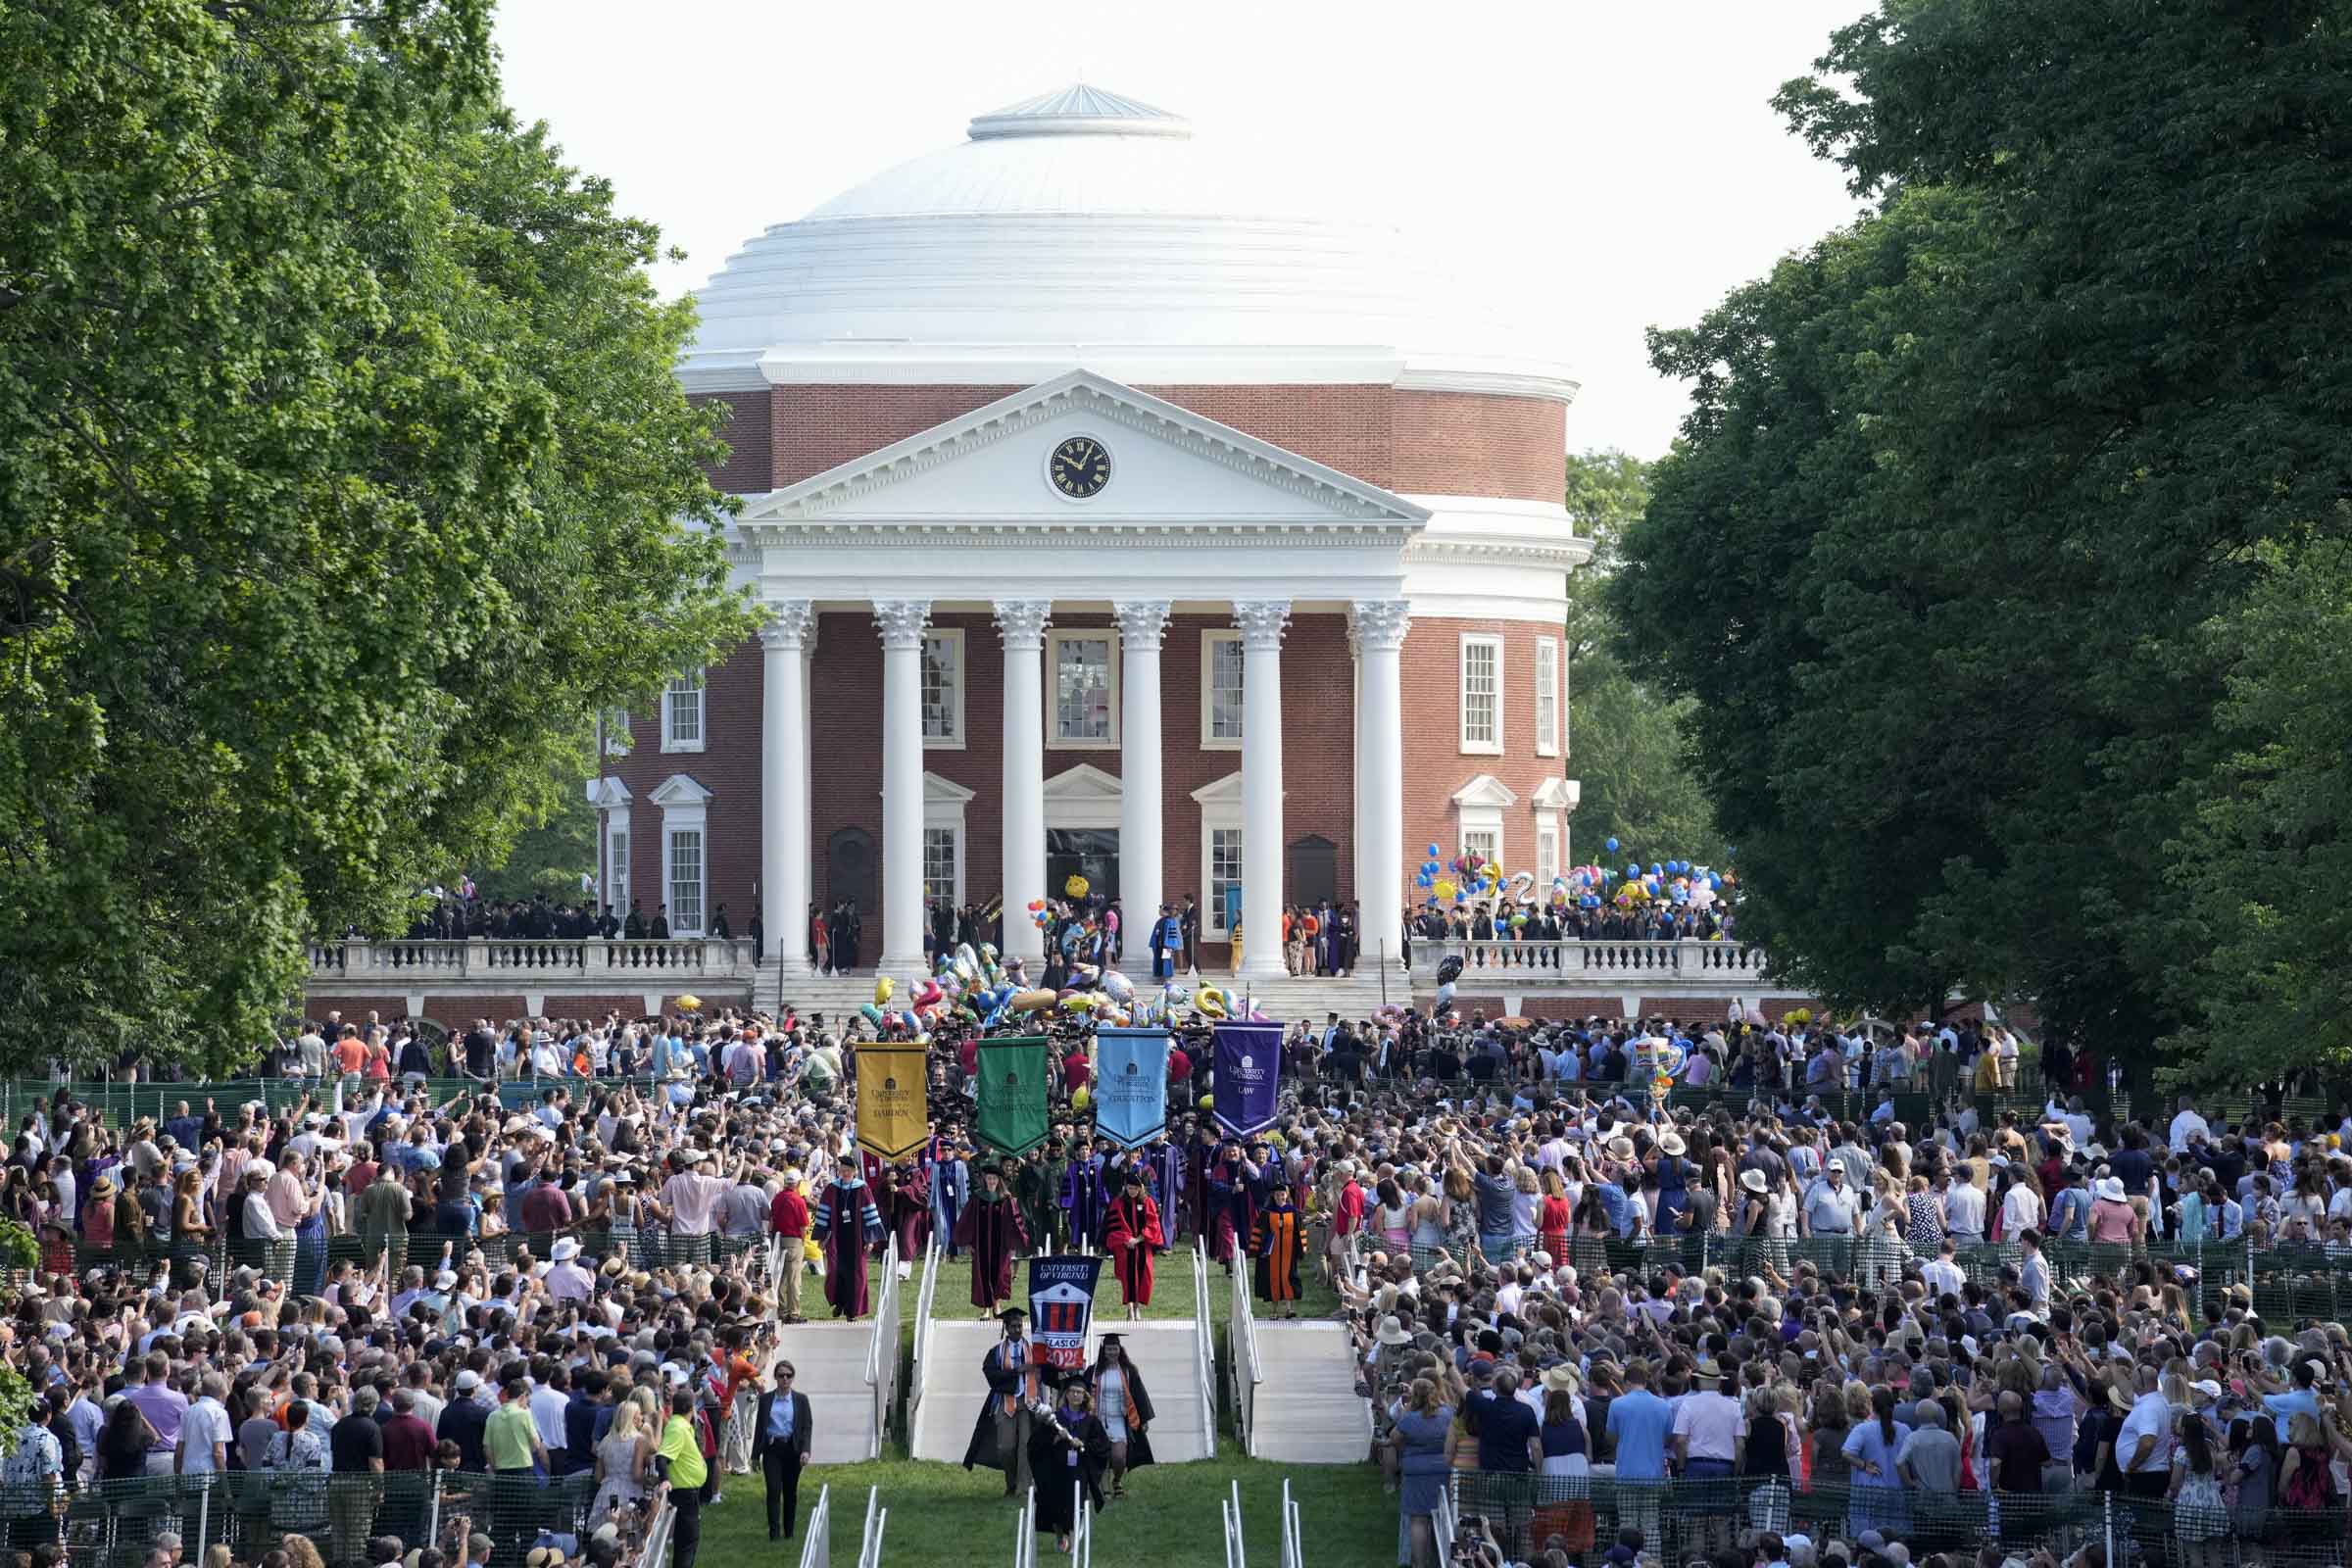 The procession begins down the UVA Lawn, filled with spectators